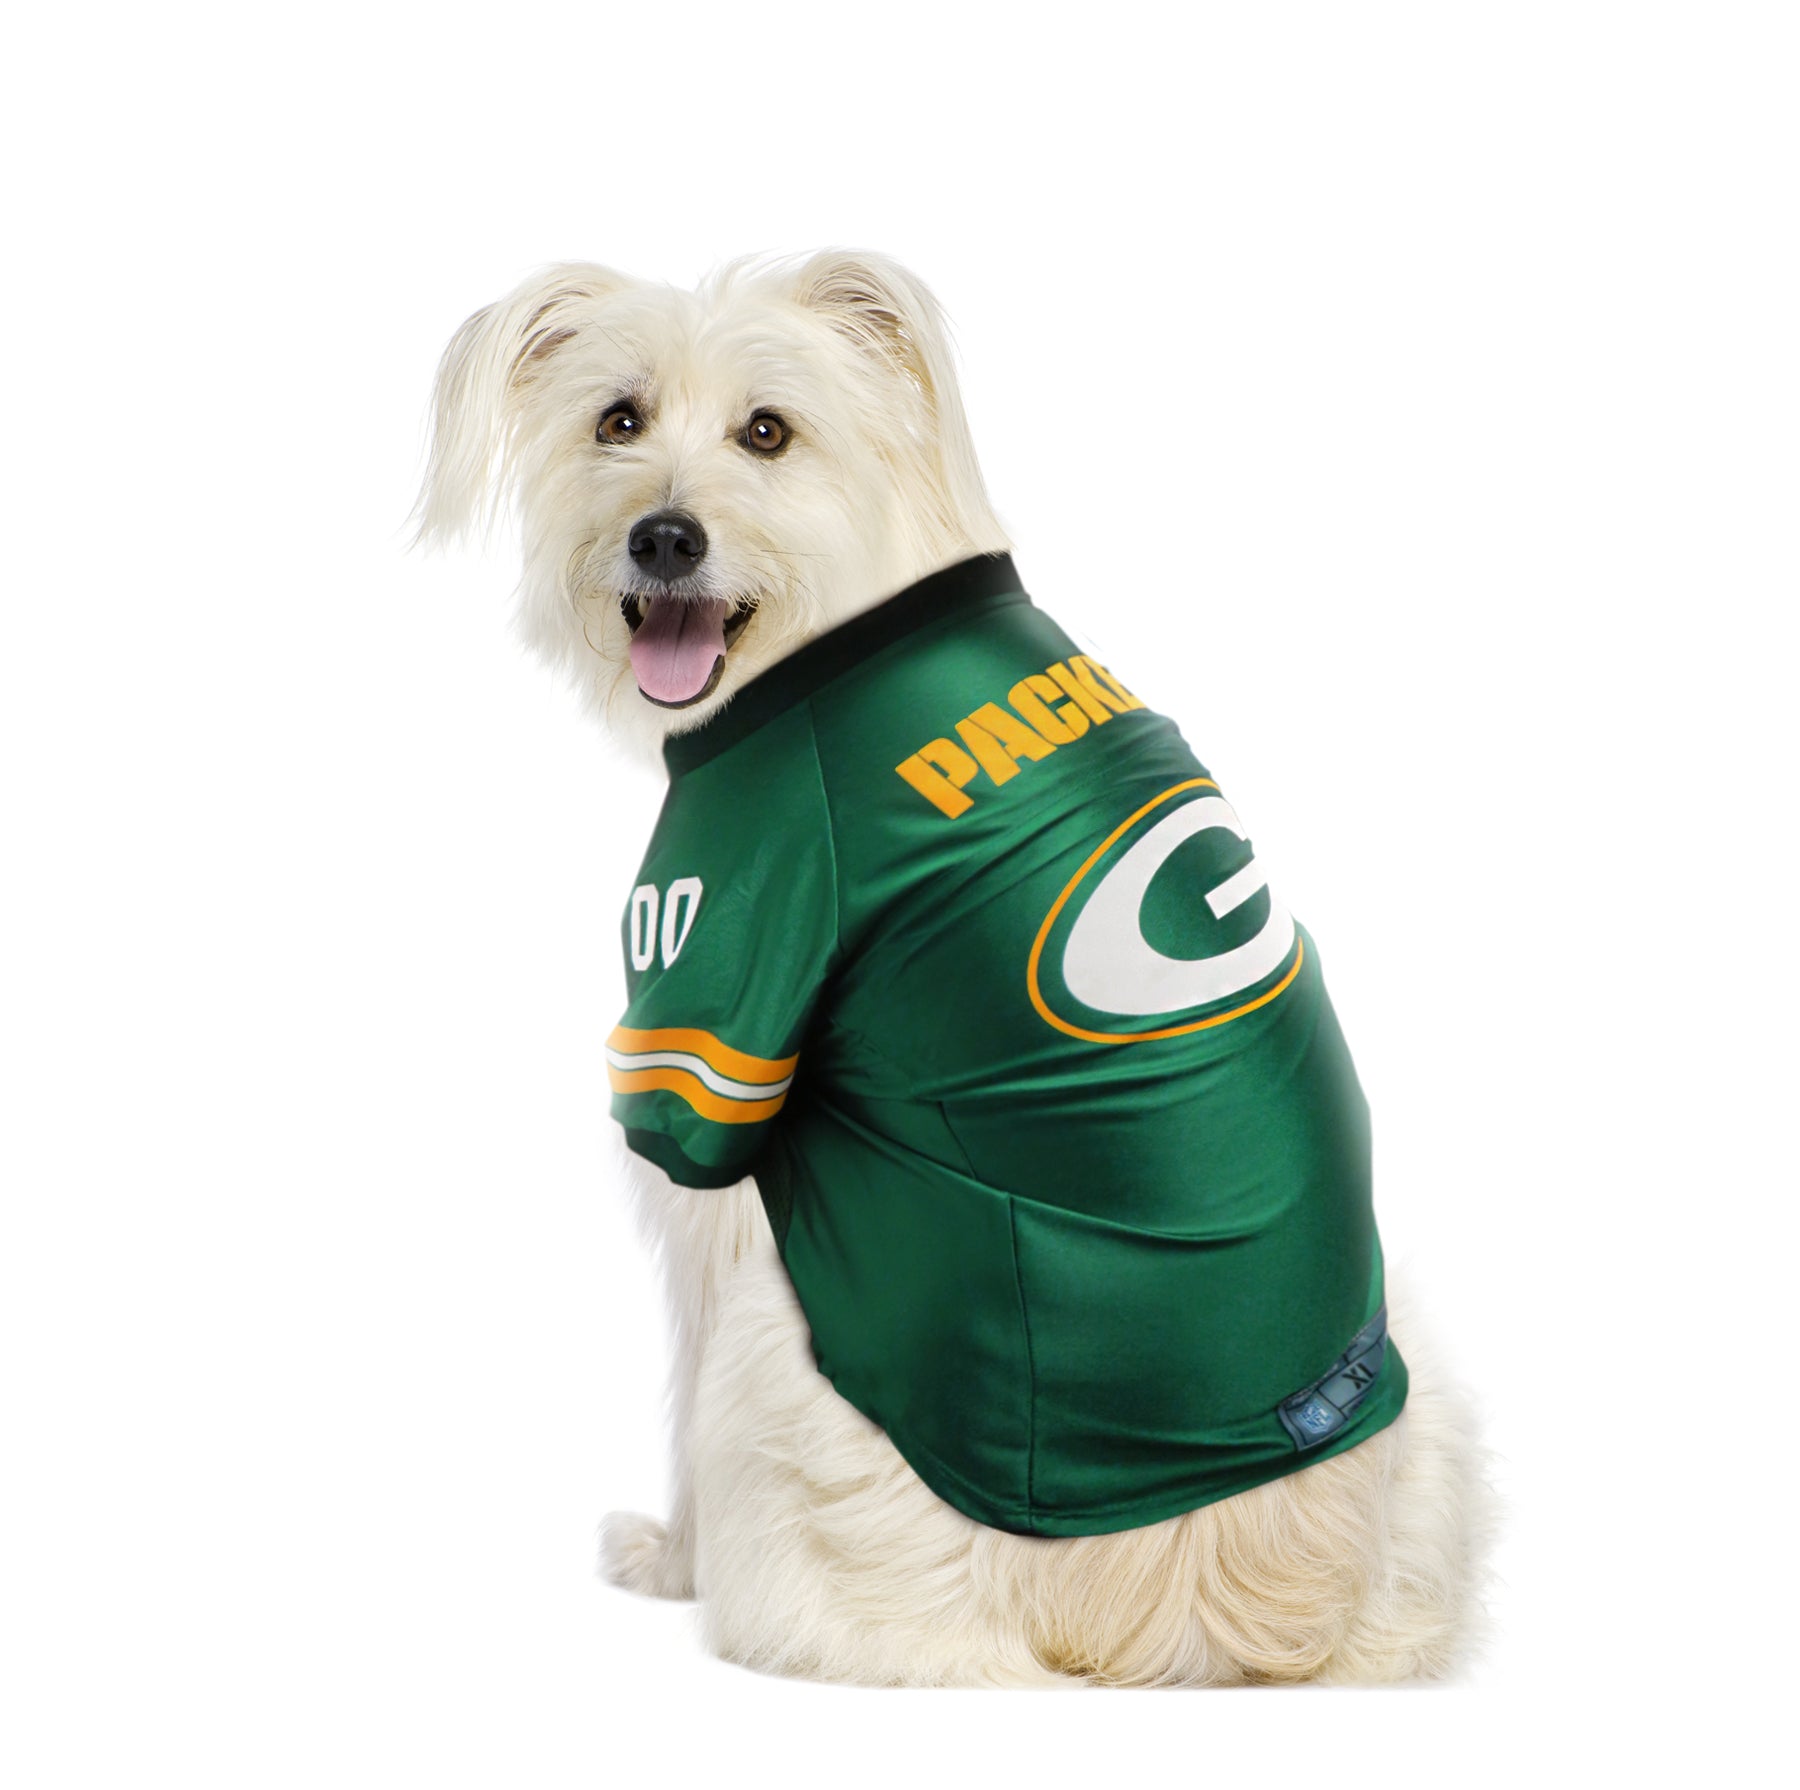  NFL Green Bay Packers Dog Jersey, Size: Large. Best Football  Jersey Costume for Dogs & Cats. Licensed Jersey Shirt. : Sports & Outdoors